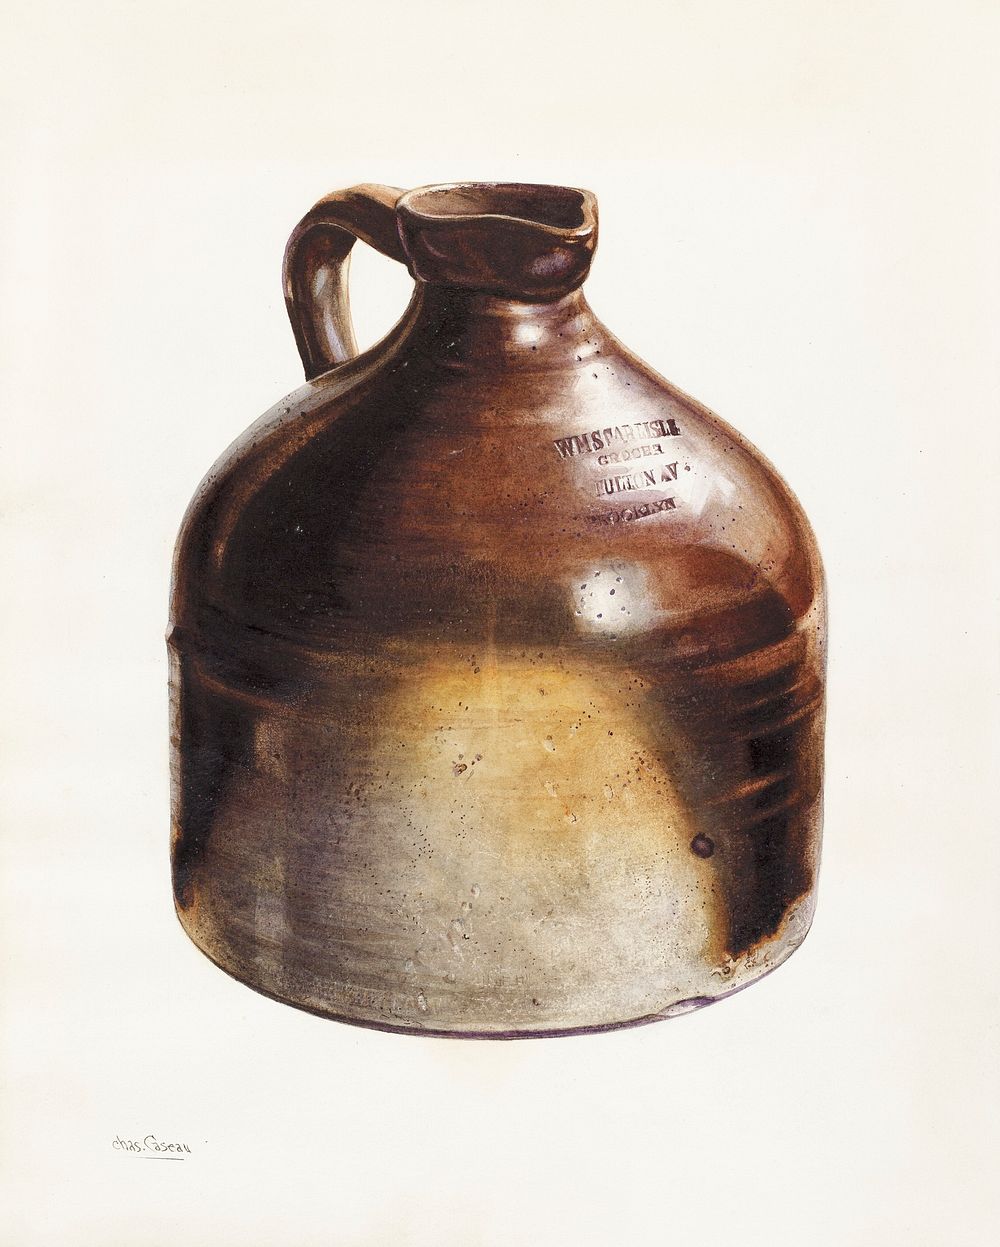 Jug for Molasses (ca. 1938) by Charles Caseau. Original from The National Gallery of Art. Digitally enhanced by rawpixel.